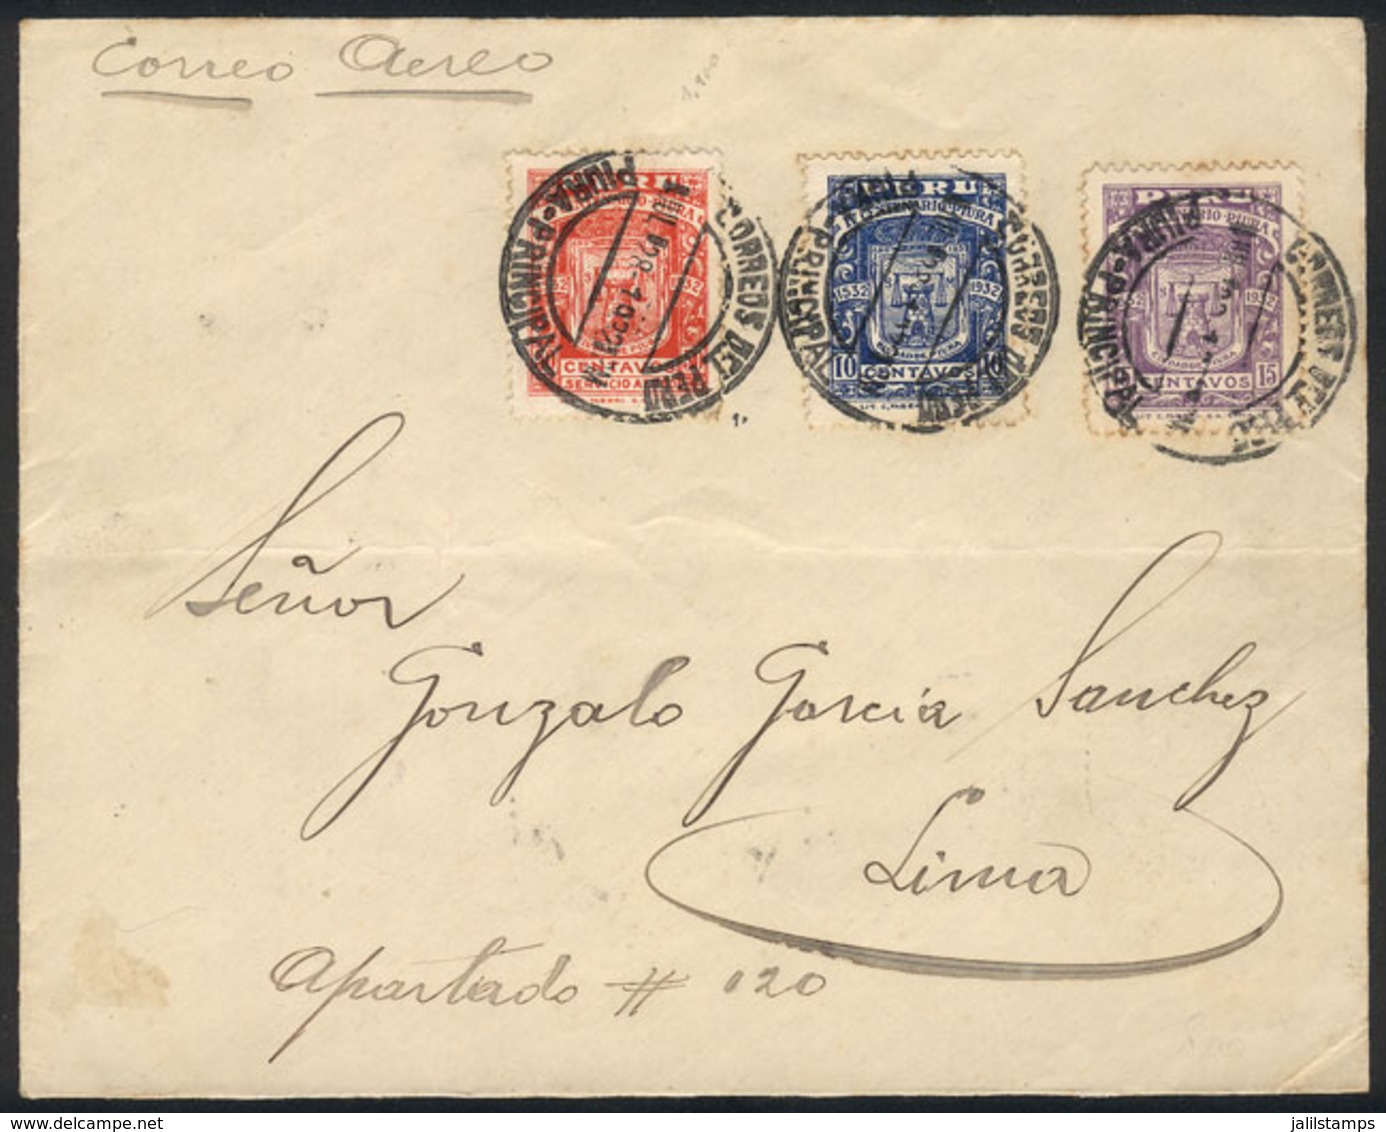 PERU: 28/JUL/1932 Piura - Lima, Front Of Airmail Cover Franked With The Set "Piura 400 Years" (Sc.300/1 + C3), With FIRS - Perú